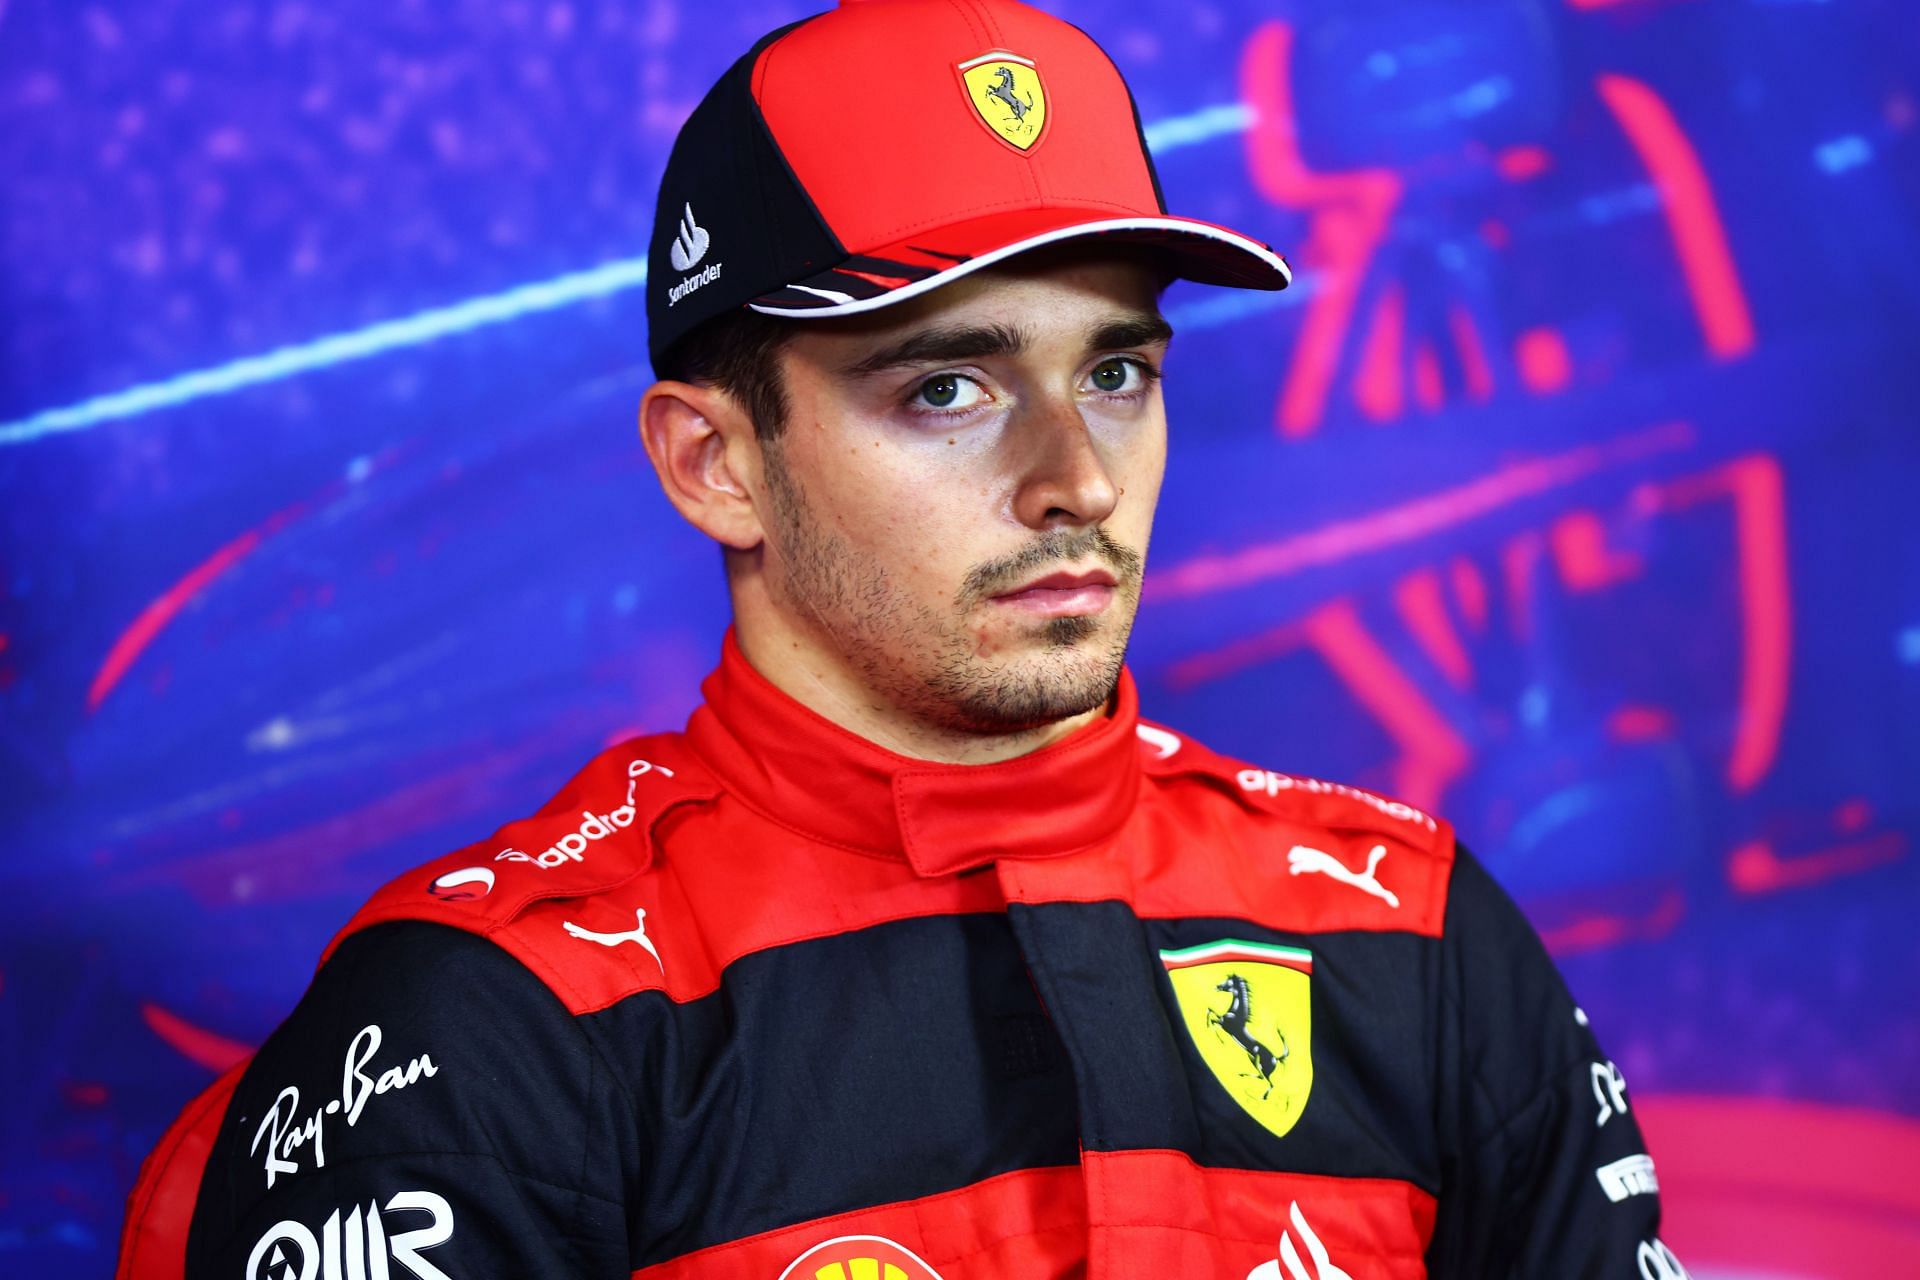 Charles Leclerc looks on in the press conference after qualifying ahead of the F1 Grand Prix of France at Circuit Paul Ricard on July 23, 2022, in Le Castellet, France (Photo by Dan Istitene/Getty Images)